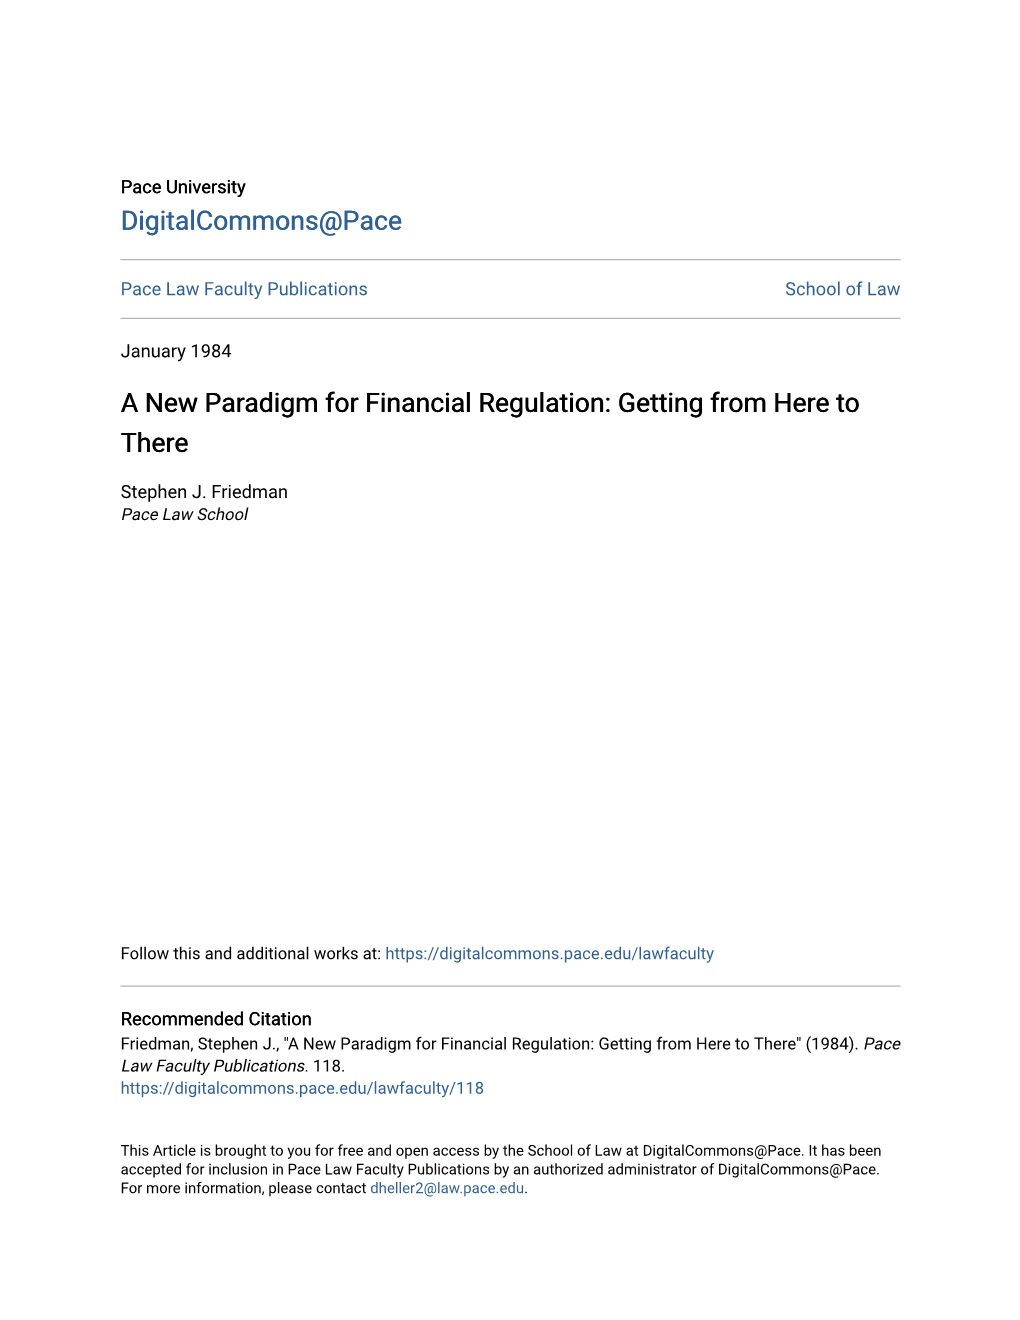 A New Paradigm for Financial Regulation: Getting from Here to There